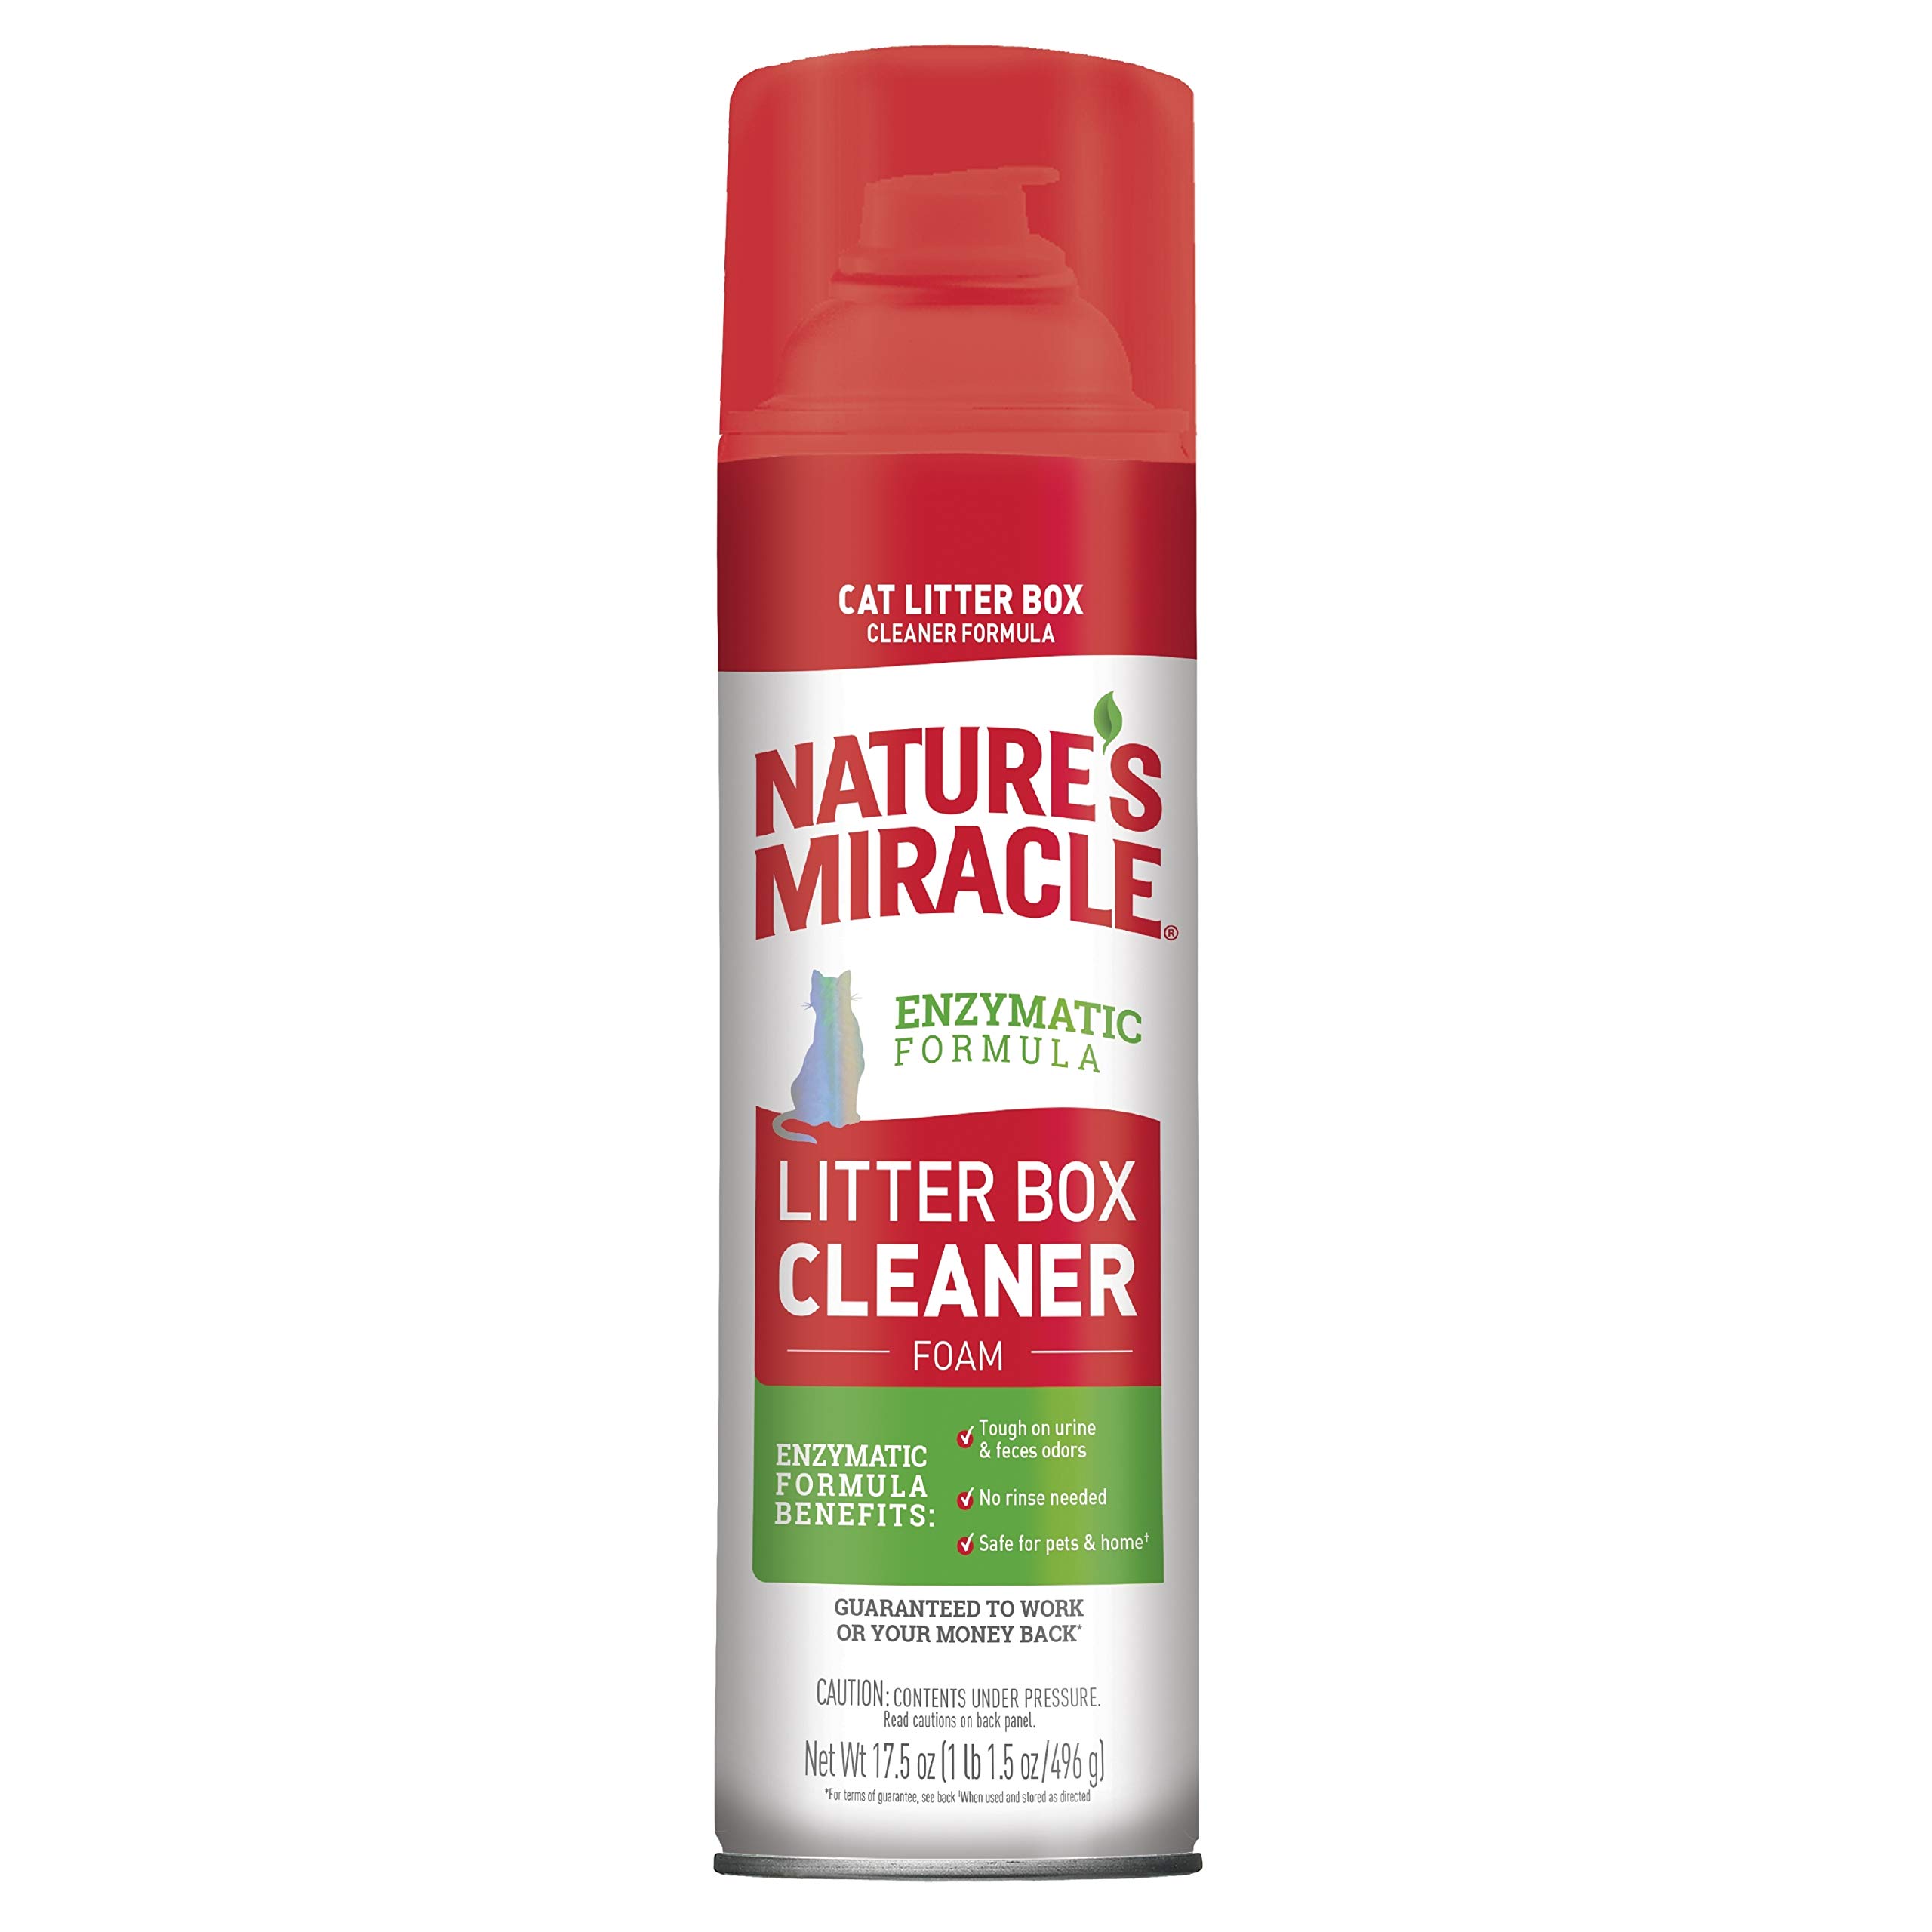 17.5-Oz Nature's Miracle Litter Box Cleaner Foam $5.60 + Free Shipping w/ Prime or on $25+